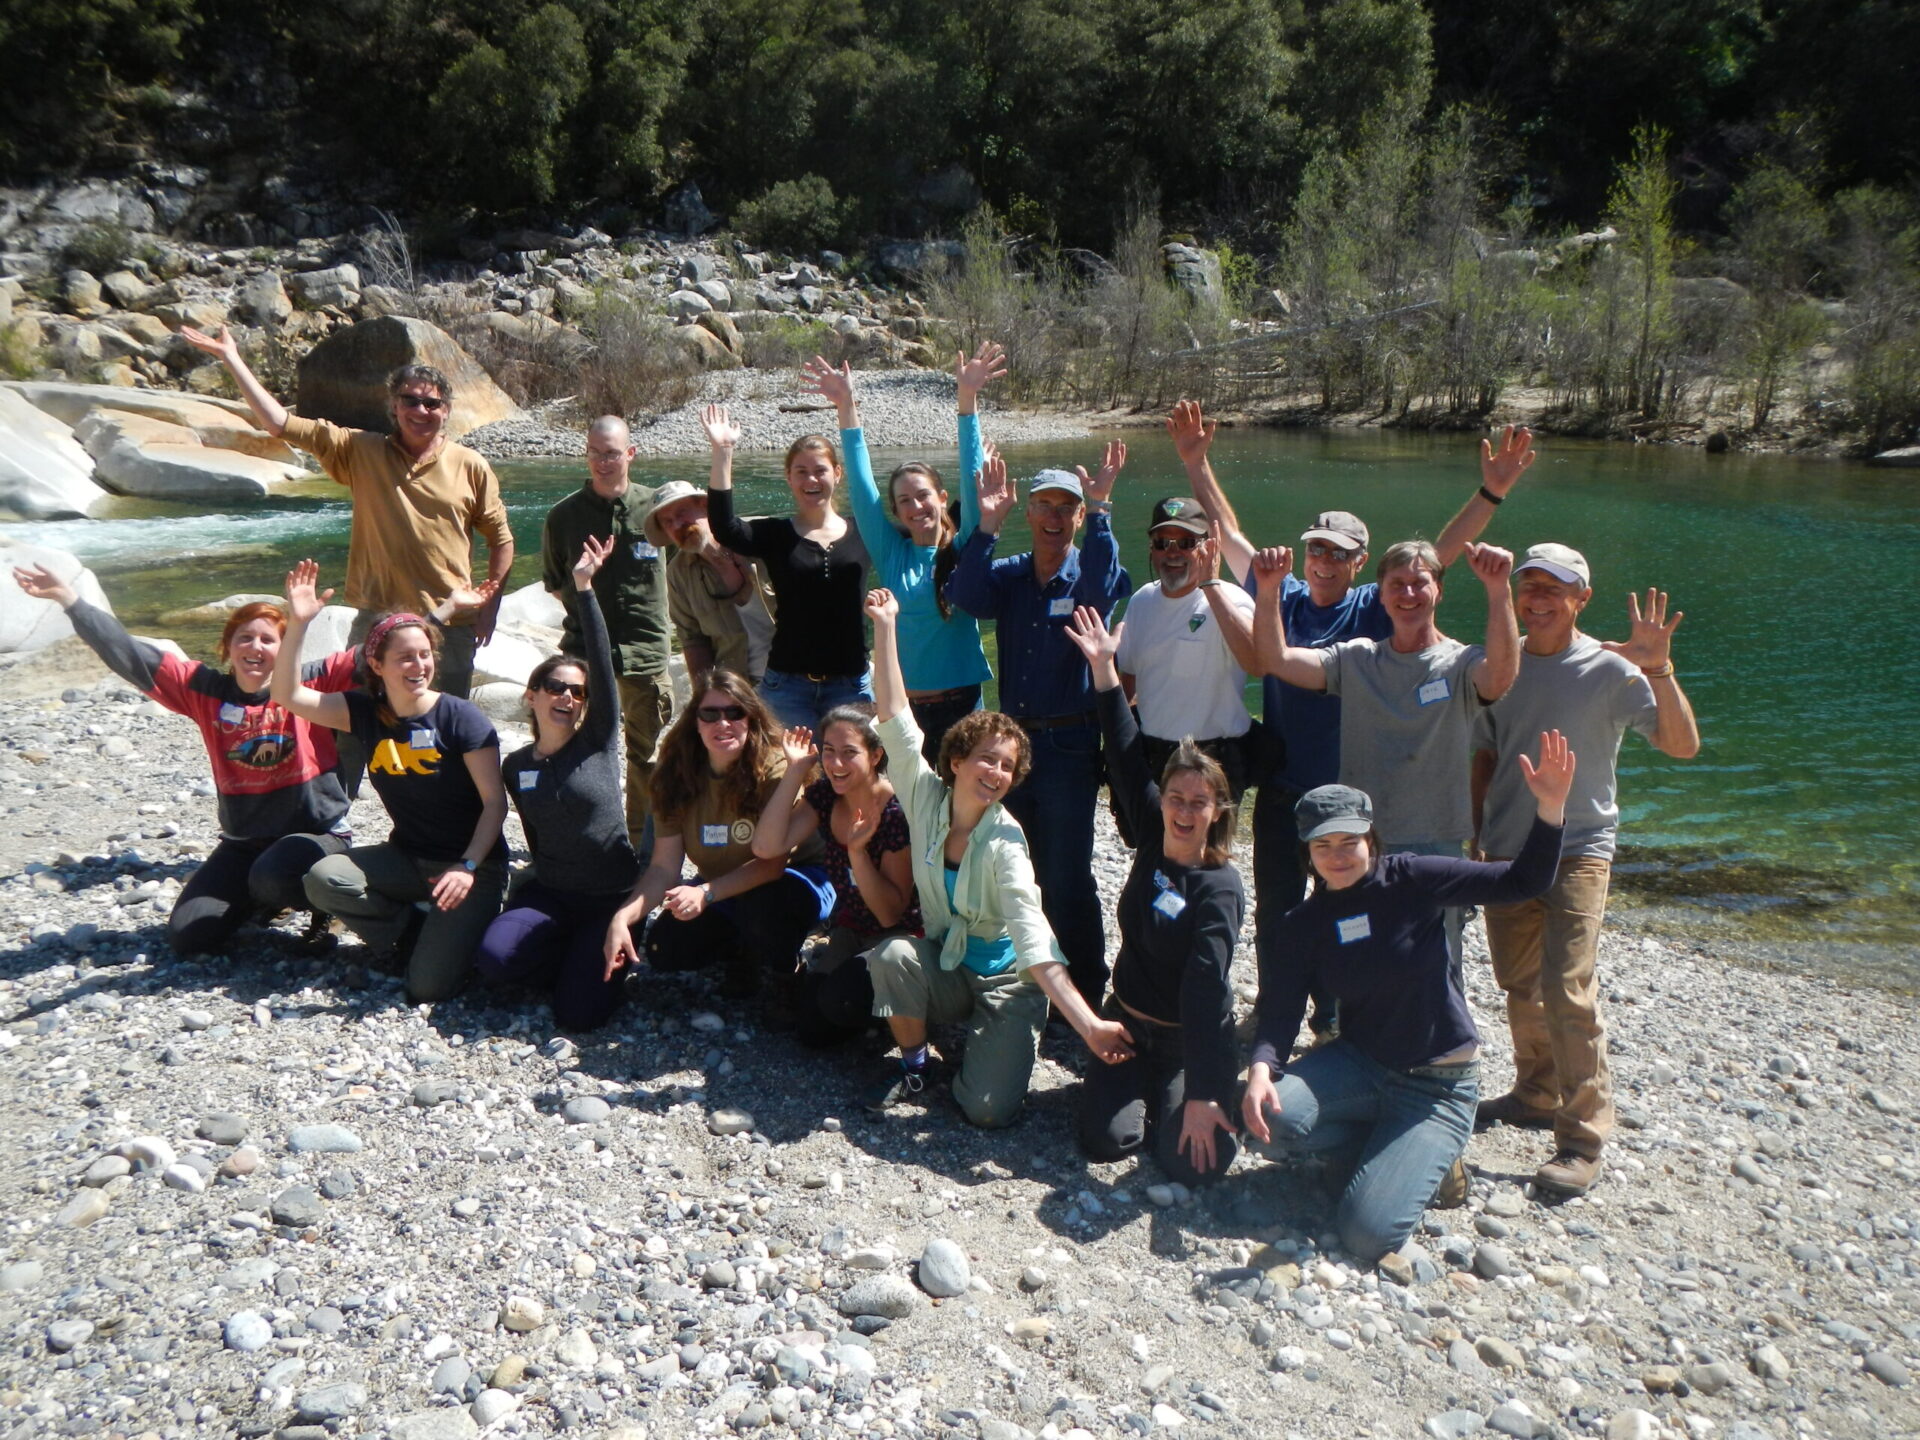 20 SYRCL volunteers celebrate by the beautiful South Yuba River at Hoyt's Crossing